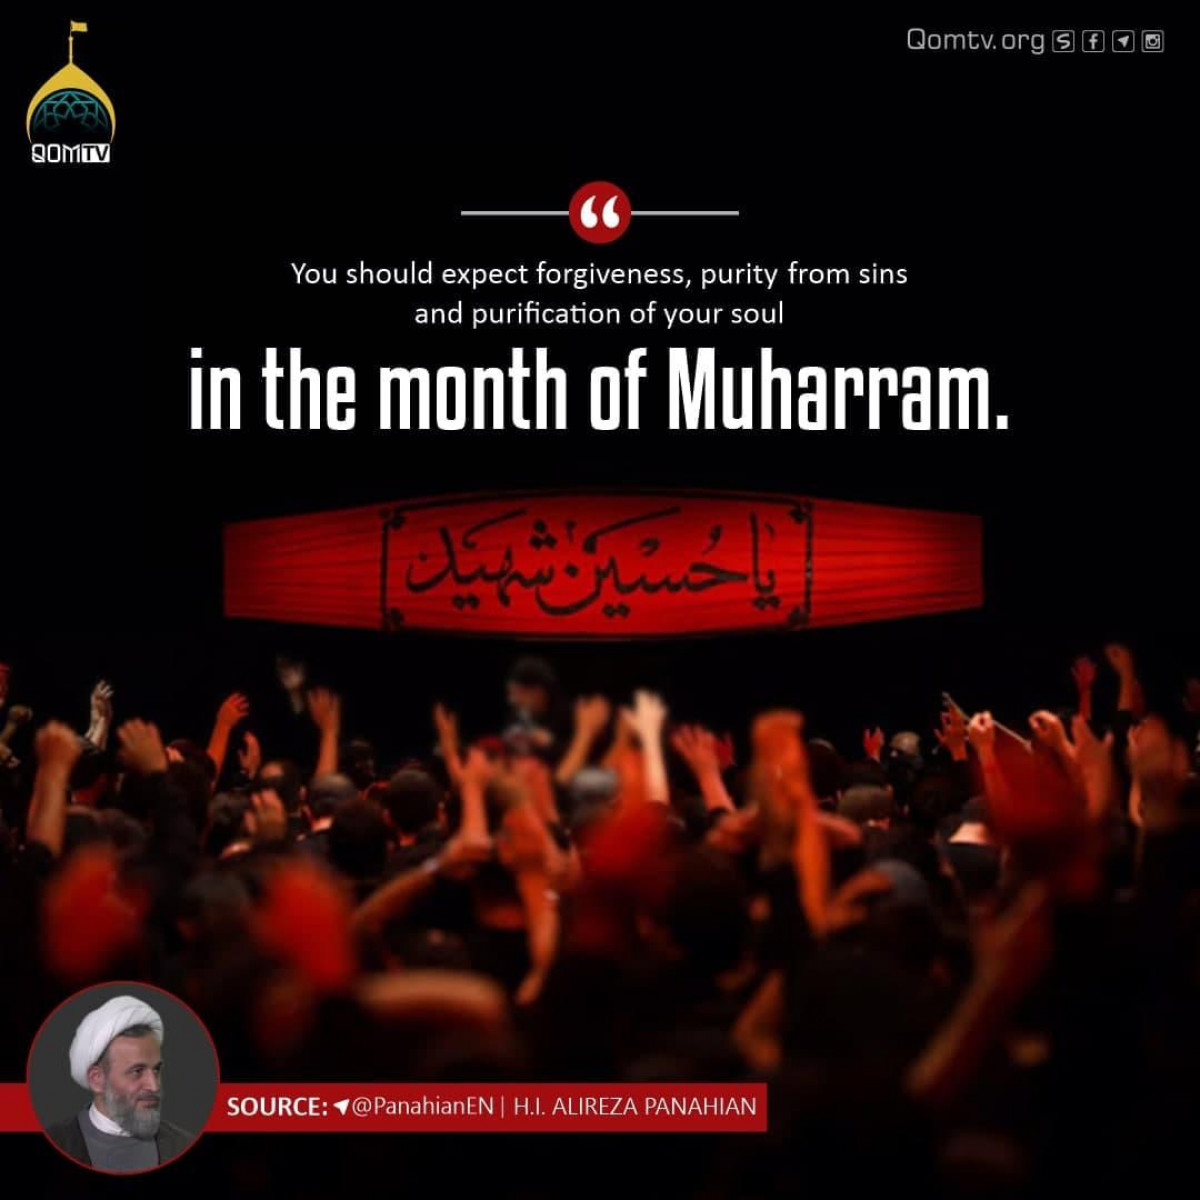 "You should expect forgiveness, purity from sins and purification of your soul in the month of Muharram."